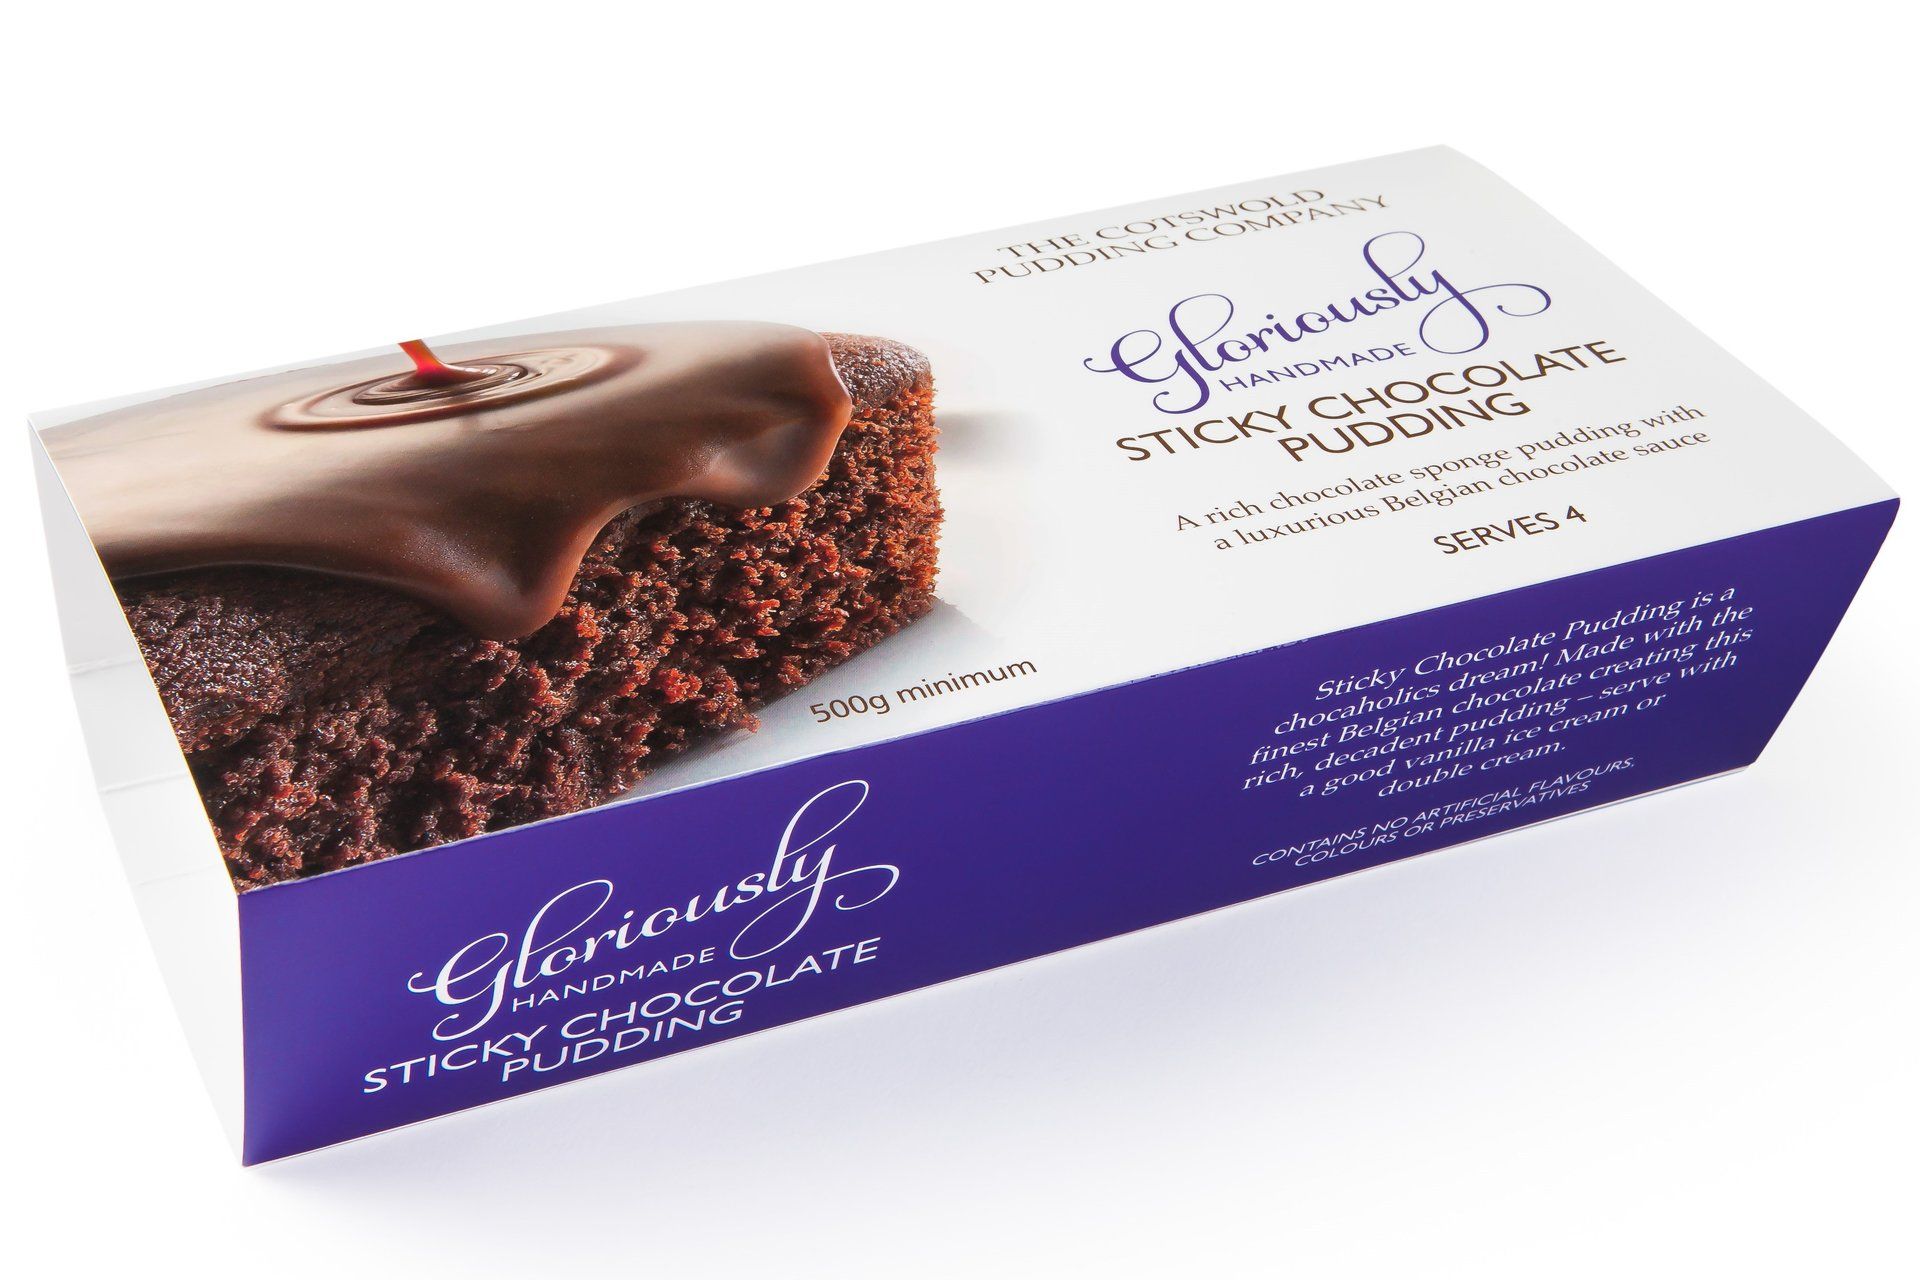 Cotswold Pudding Co Sticky Chocolate